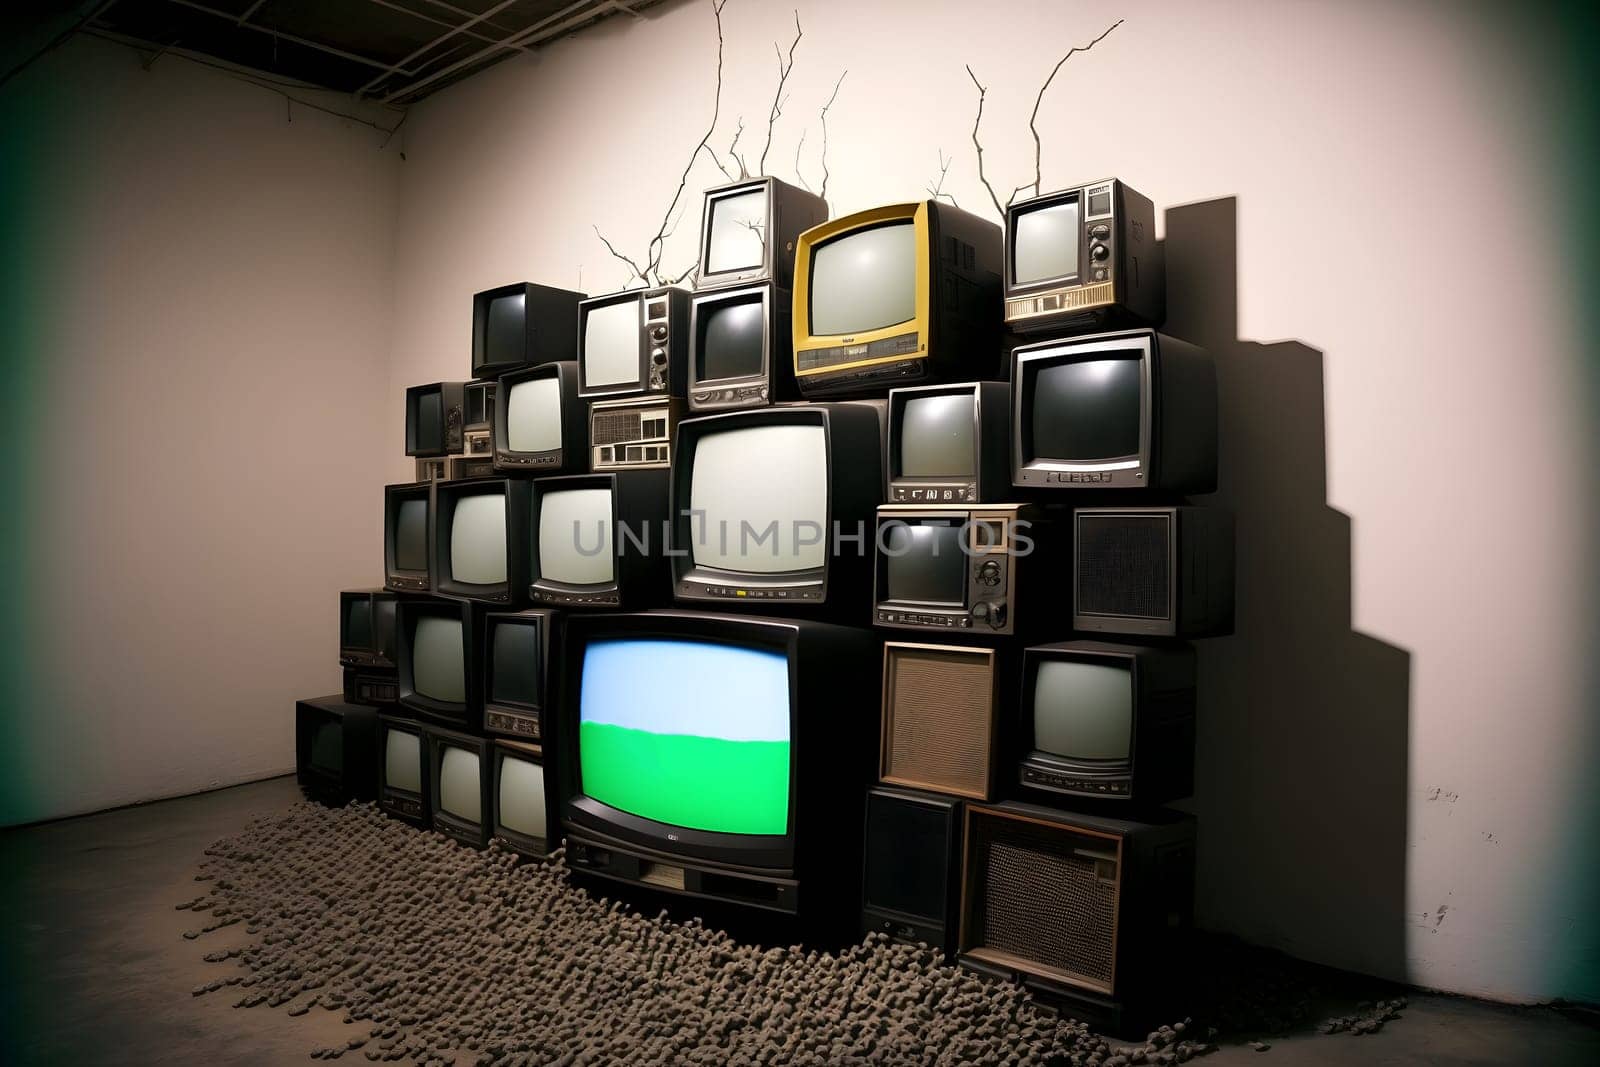 many turned off old analog tv sets stacked along the wall, neural network generated art by z1b